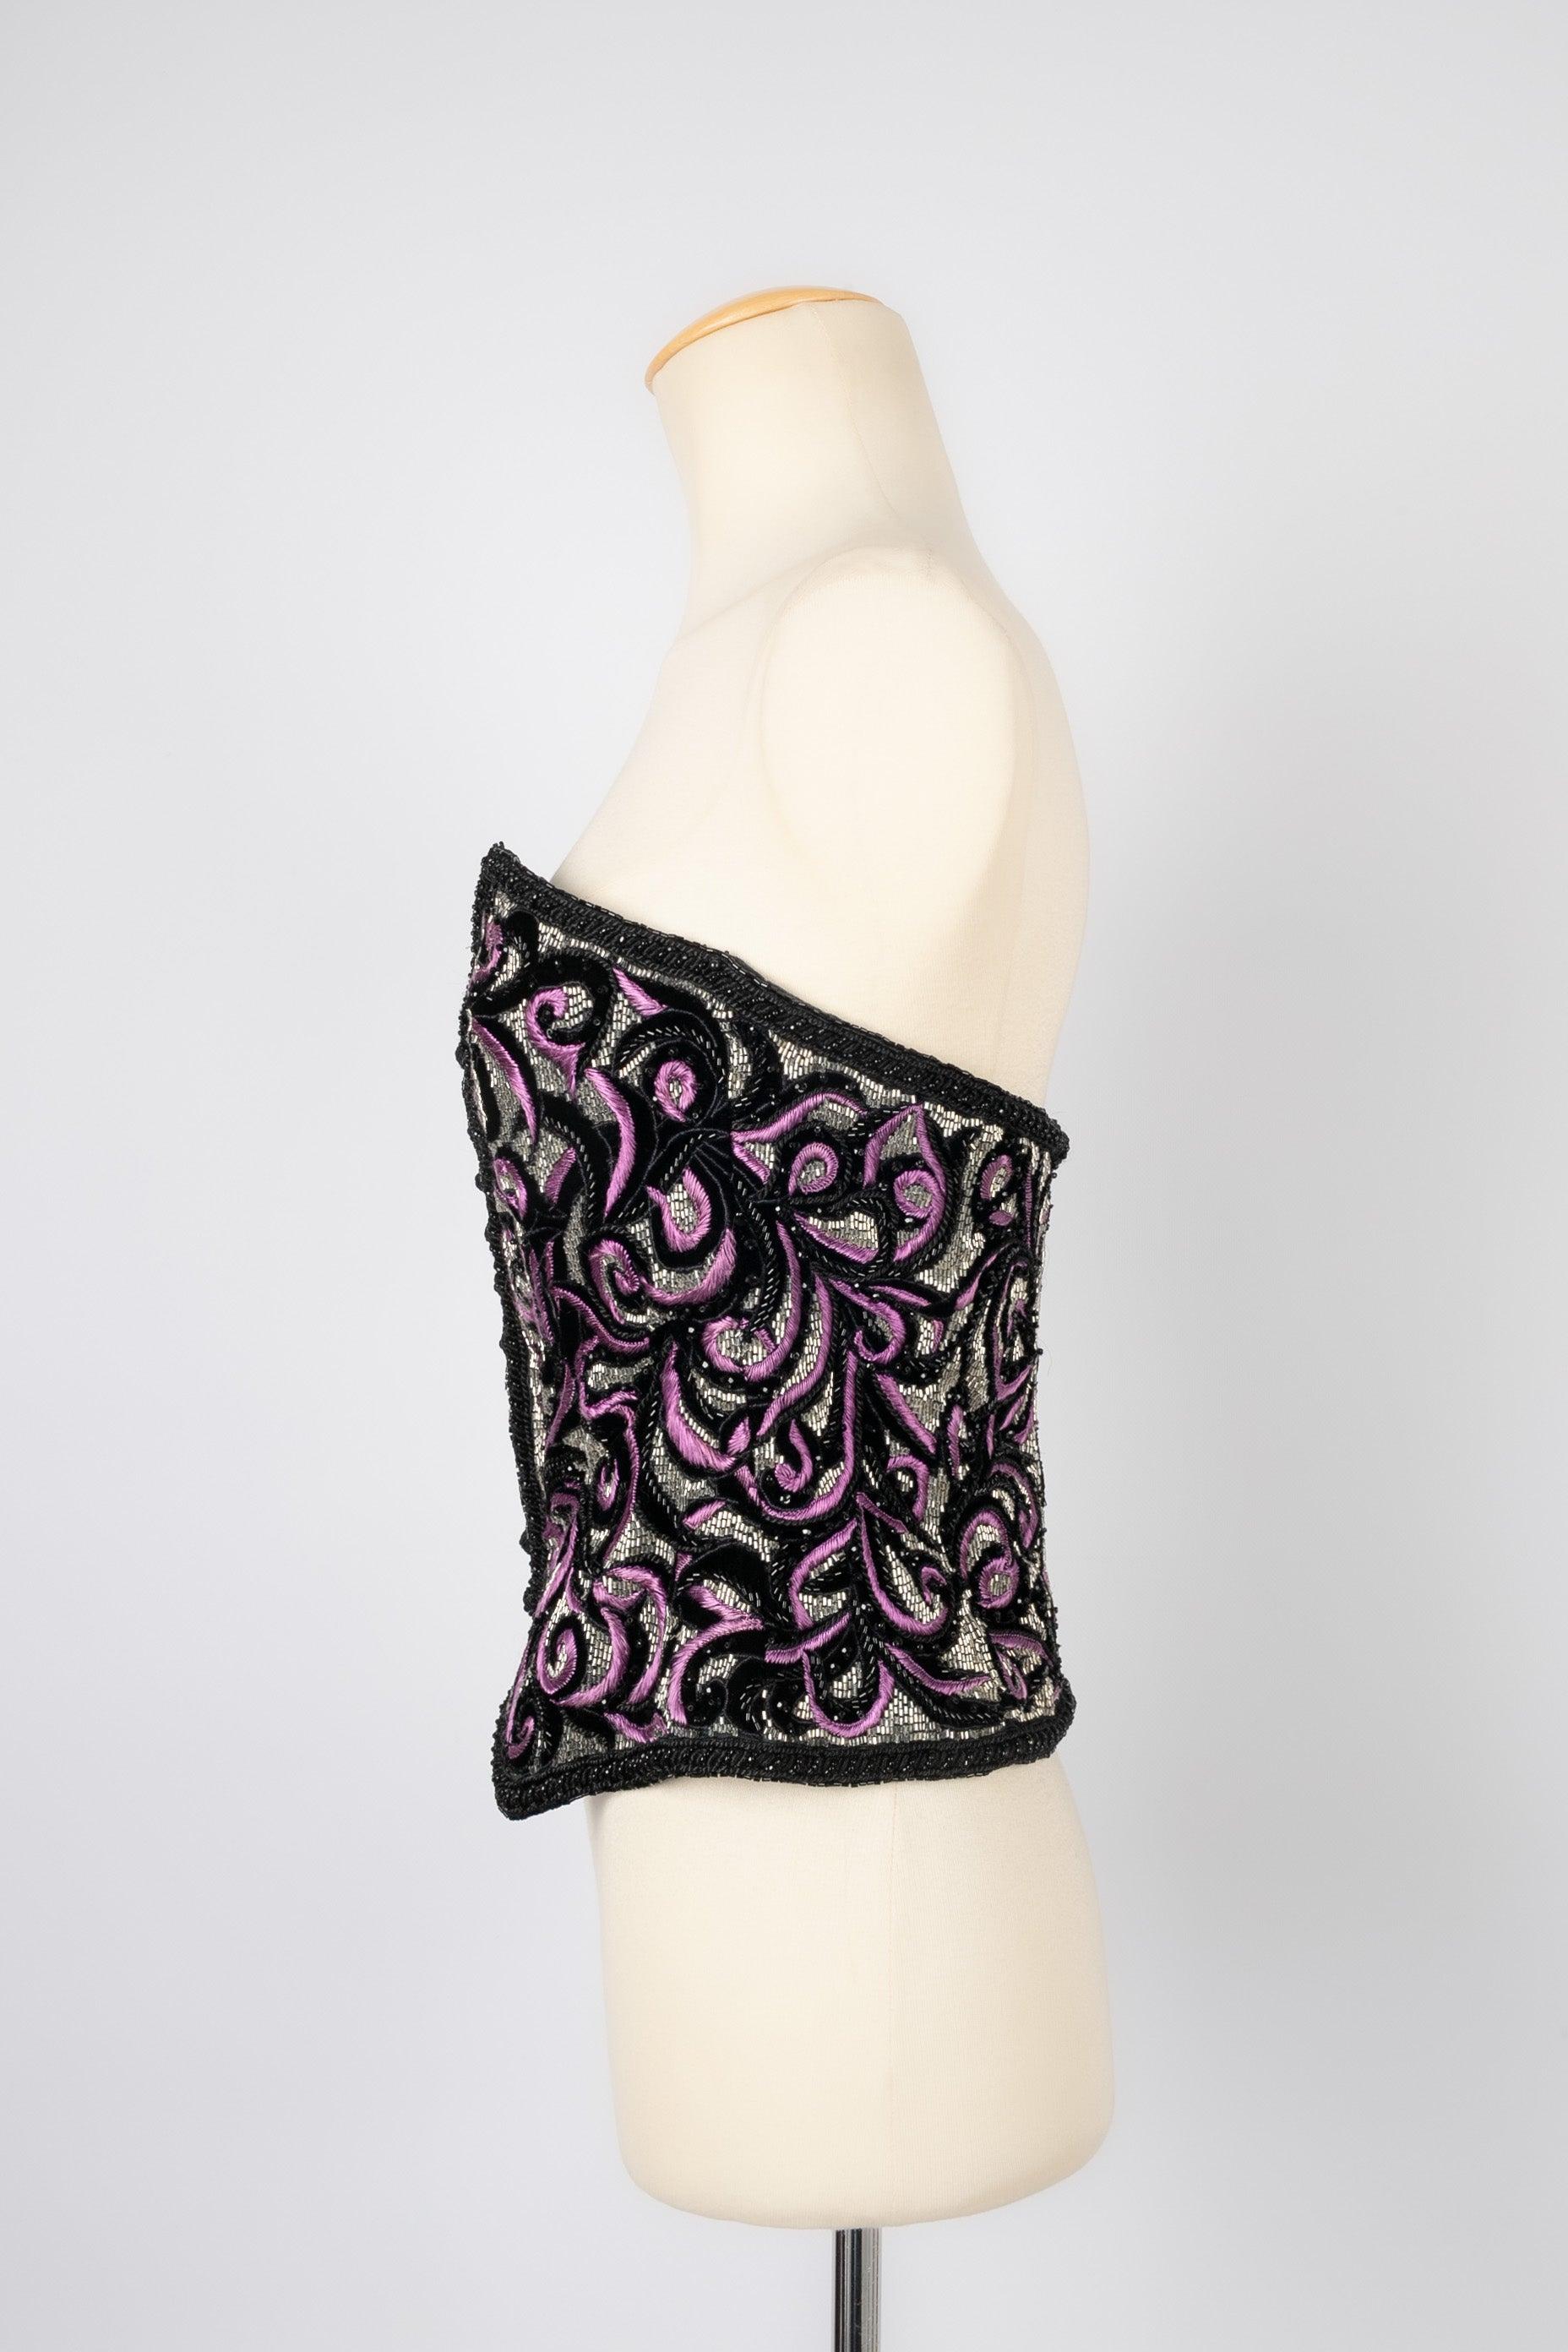 Jean Louis Scherrer - (Made in France) Bustier top entirely sewn with black, purple, and silvery pearls. No size indicated, it fits a 34/36FR.

Additional information:
Condition: Good condition
Dimensions: Chest: 77 cm - Waist: 67 cm - Length: 36